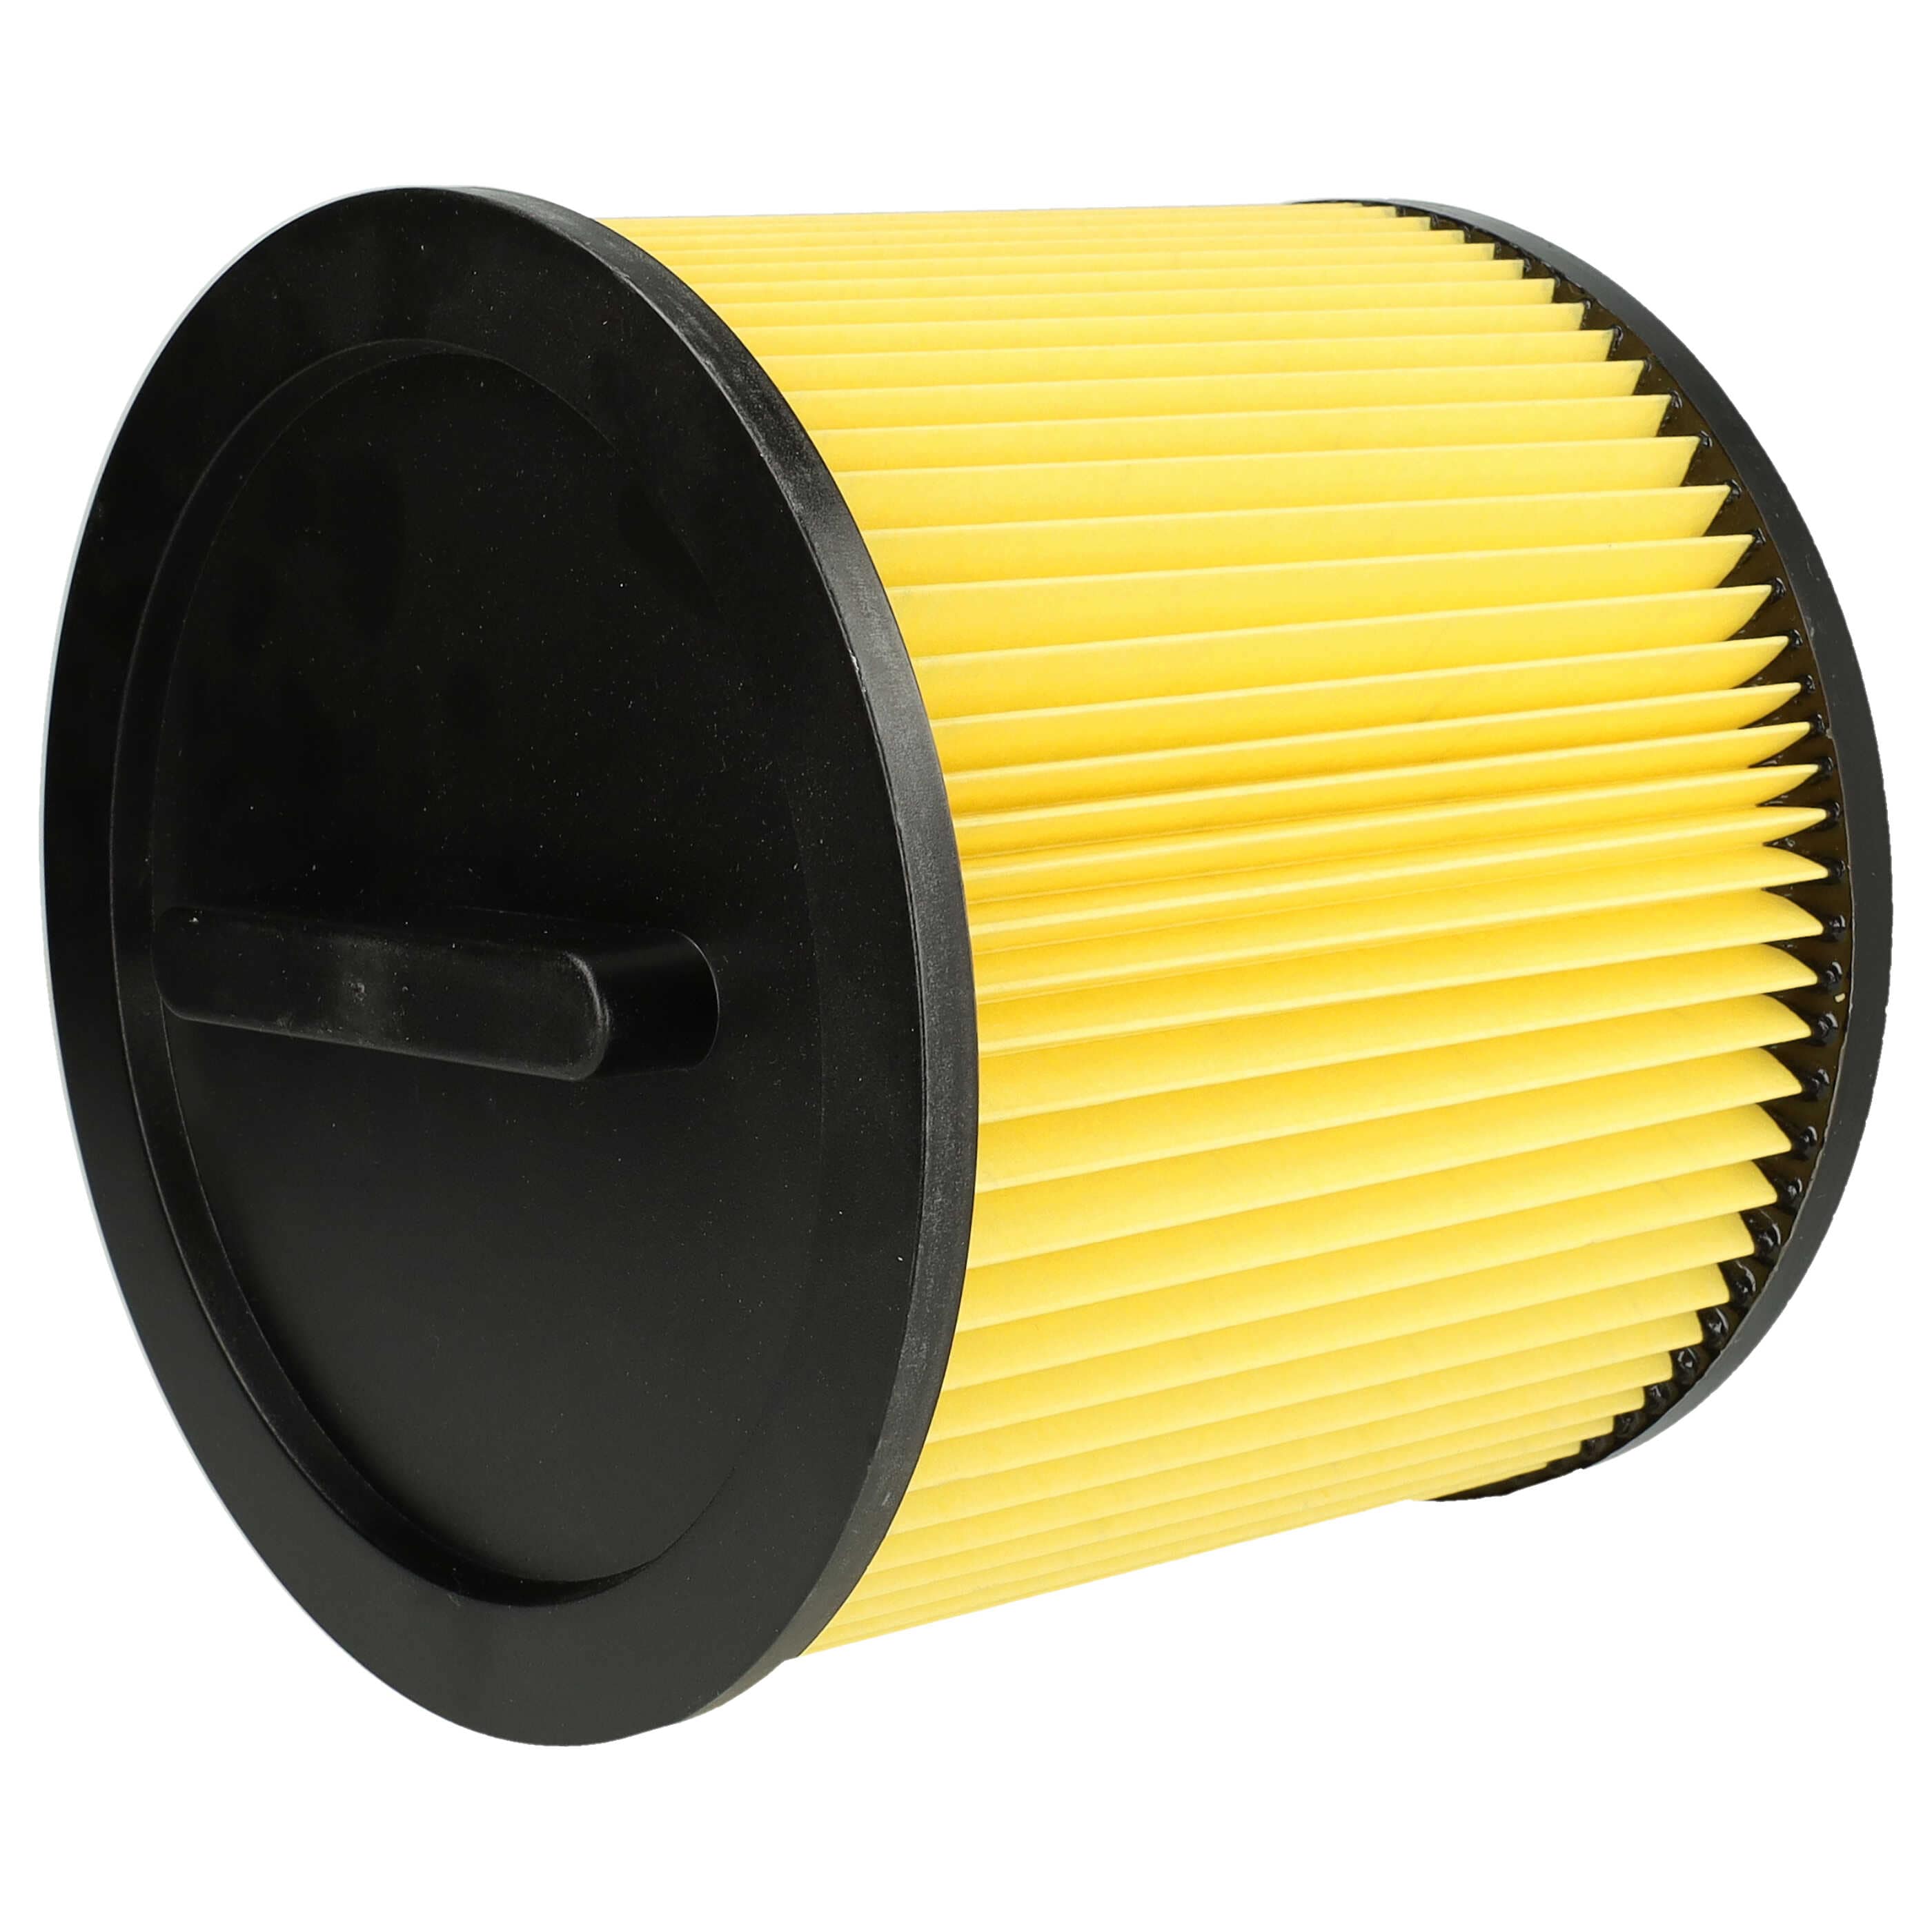 1x cartridge filter replaces Einhell 2351113 for Thomas Vacuum Cleaner, black / yellow